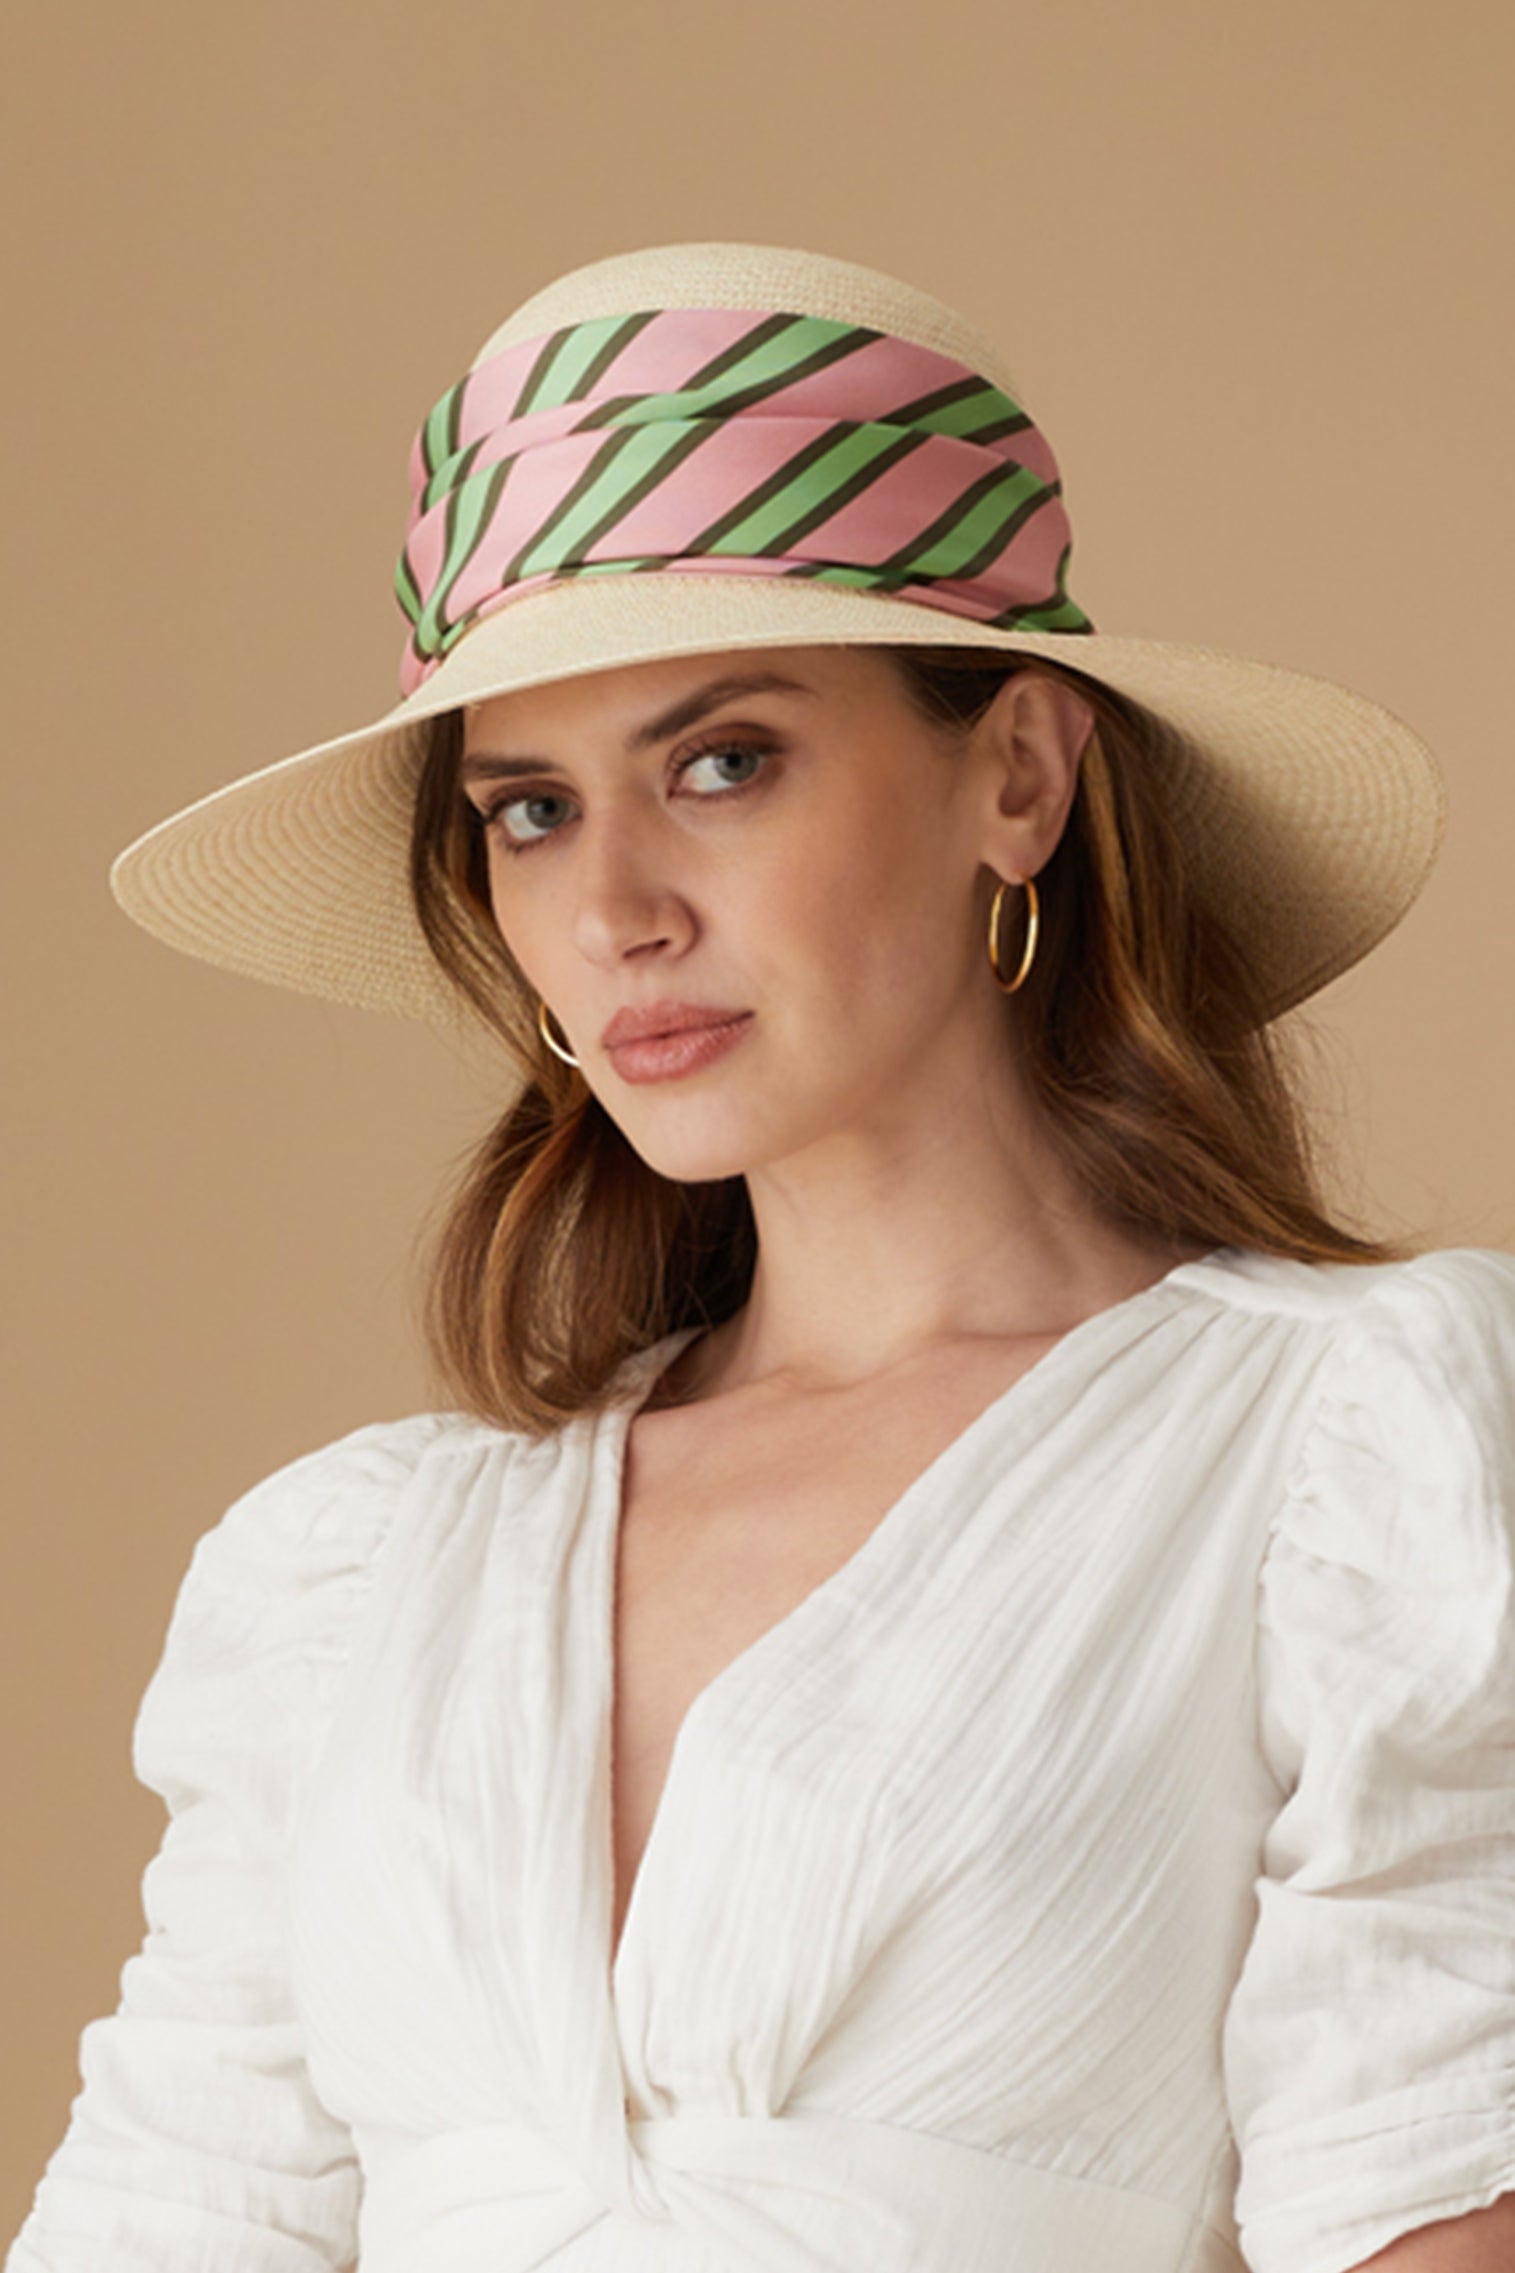 Buy Best hat+with+neck+cover Online At Cheap Price, hat+with+neck+cover &  Qatar Shopping